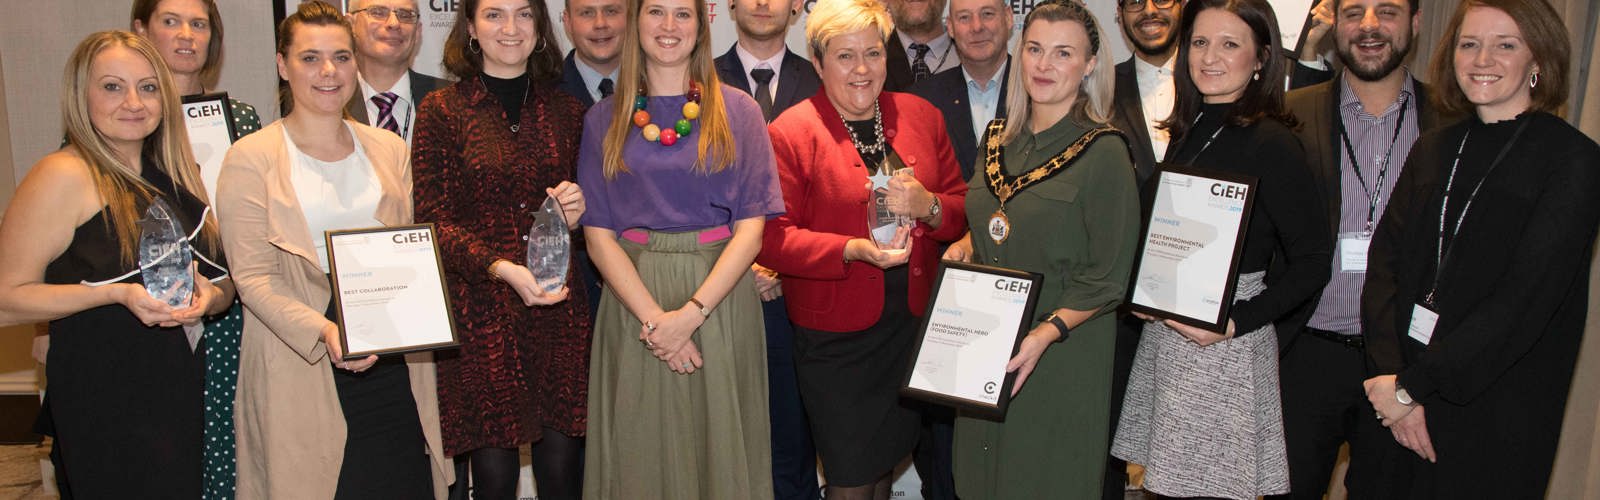 The winners at the CIEH Excellence Awards 2019